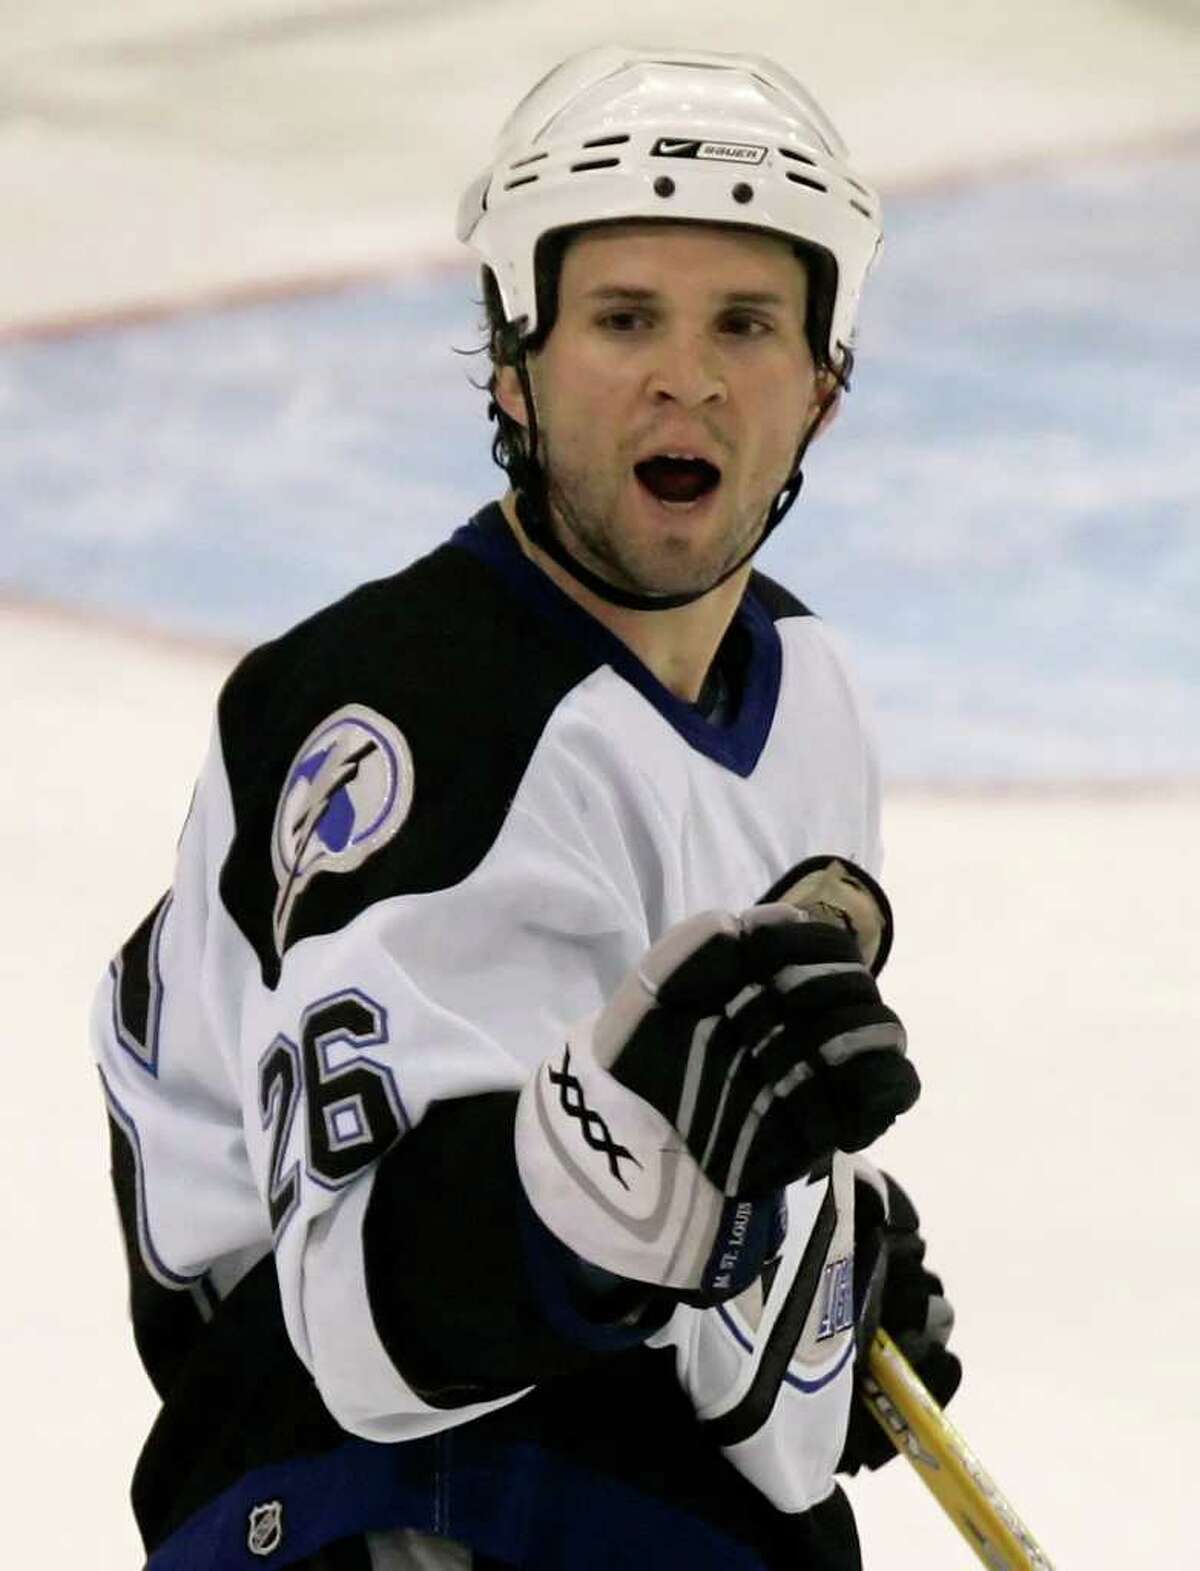 Tampa Bay Lightning's Martin St. Louis (26) celebrates his game-winning shoot out goal against the Pittsburgh Penguins in NHL hockey action in Pittsburgh, Sunday, Jan. 7, 2007. The Lightning beat the Pens 3-2 in a shoot out.(AP Photo/Gene J. Puskar)